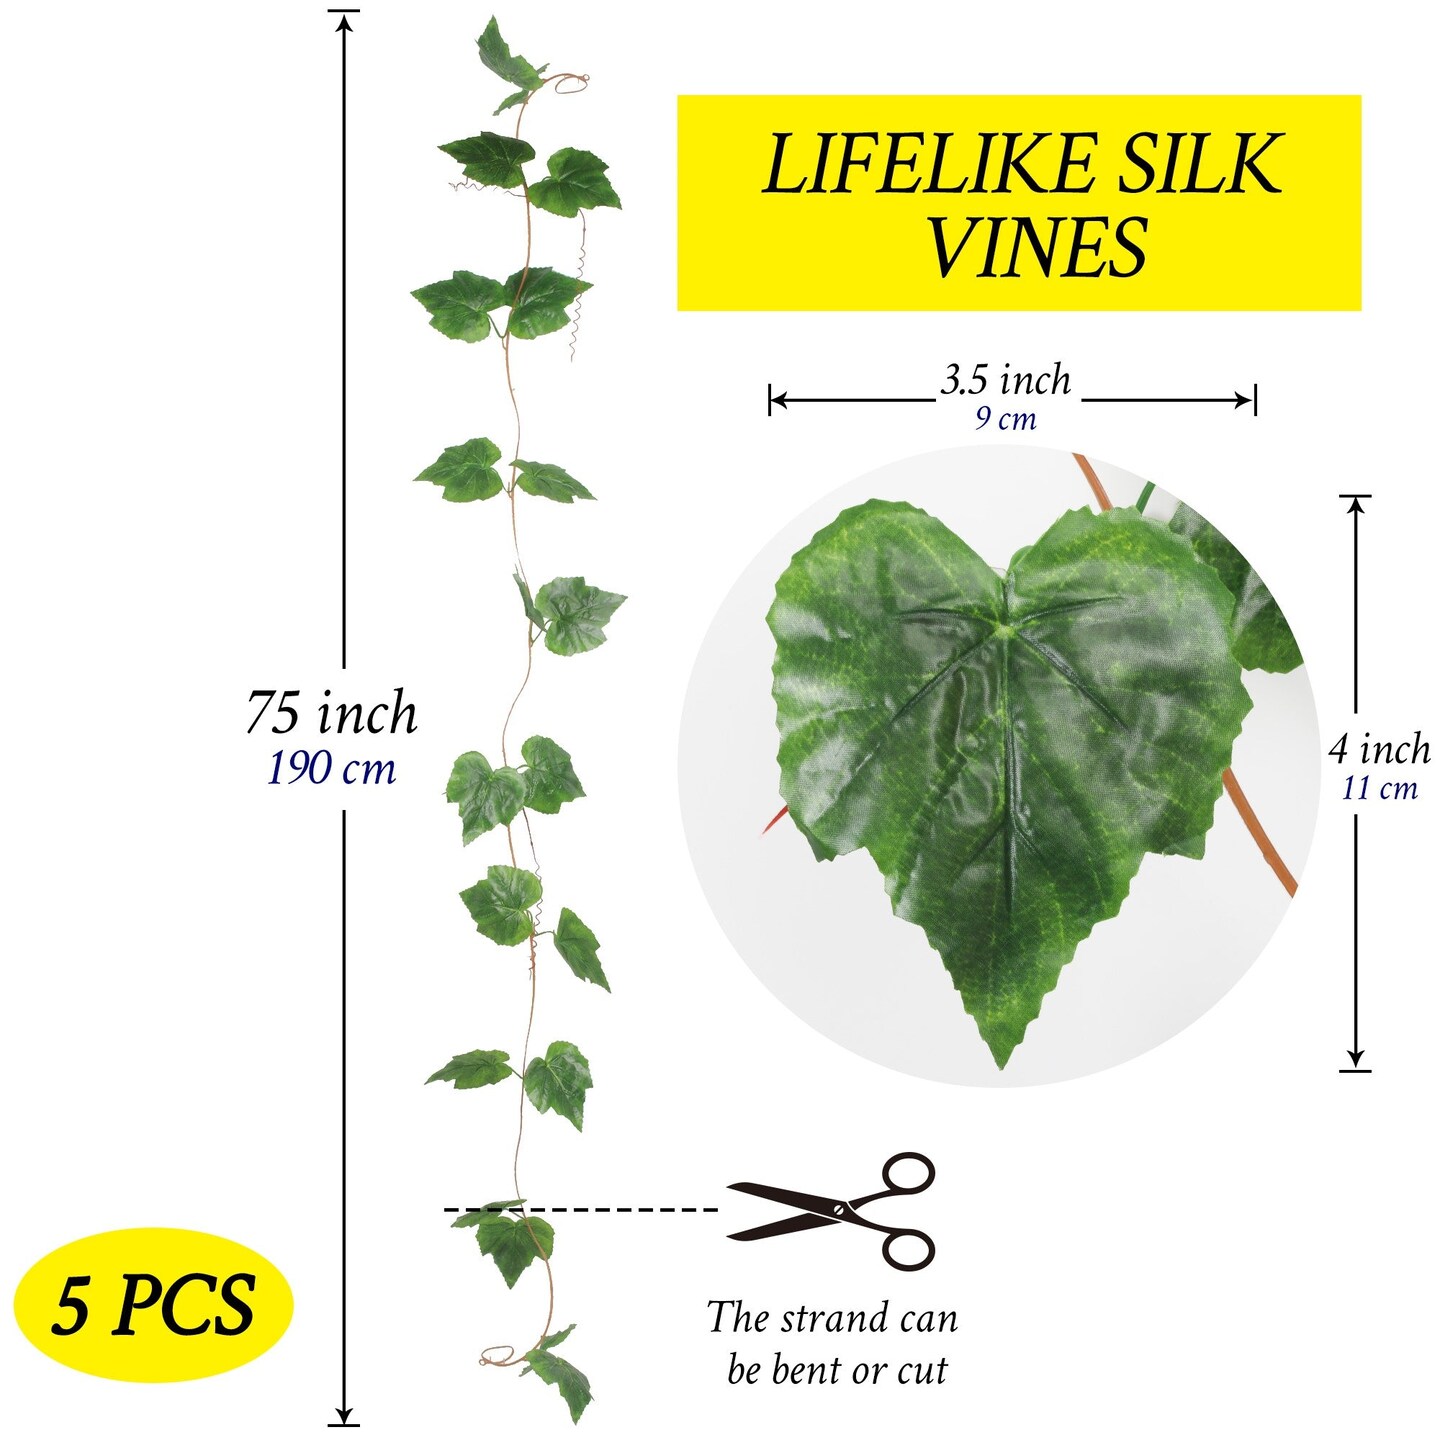 Grand Verde Artificial Vines Silk Leaves Hanging Ivy Greenery Faux